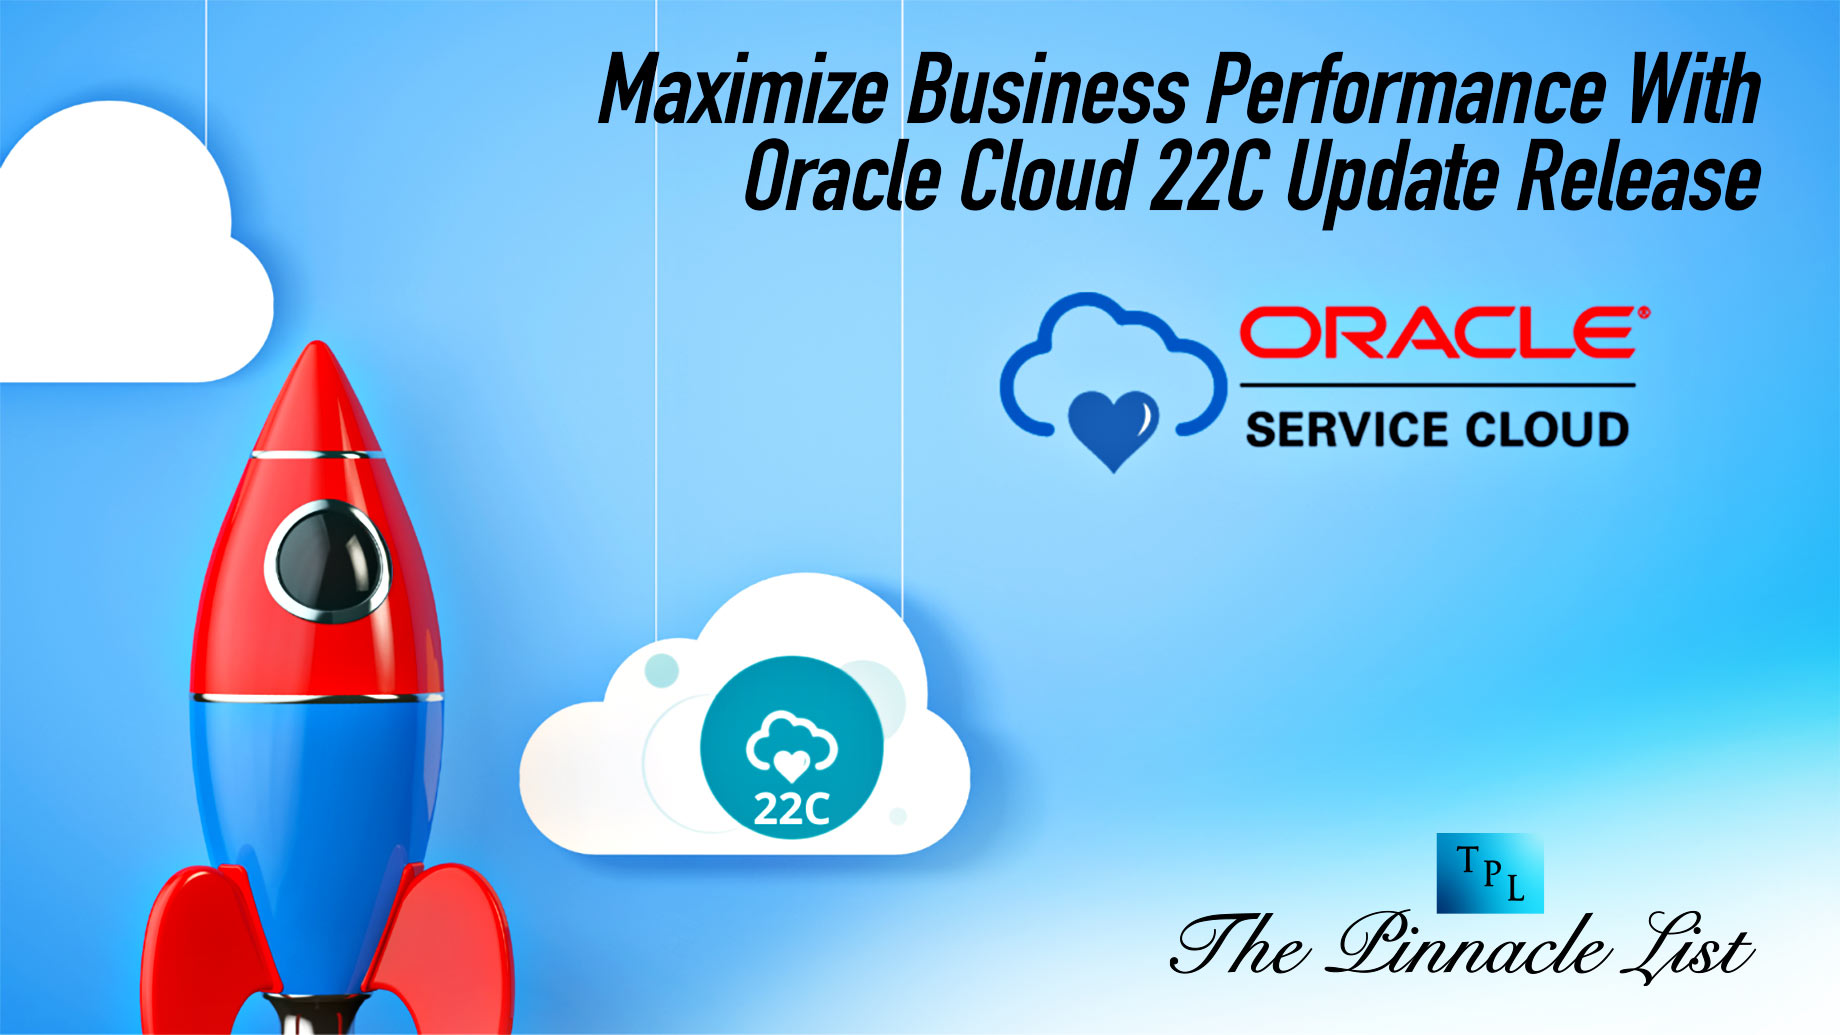 Maximize Business Performance With Oracle Cloud 22C Update Release